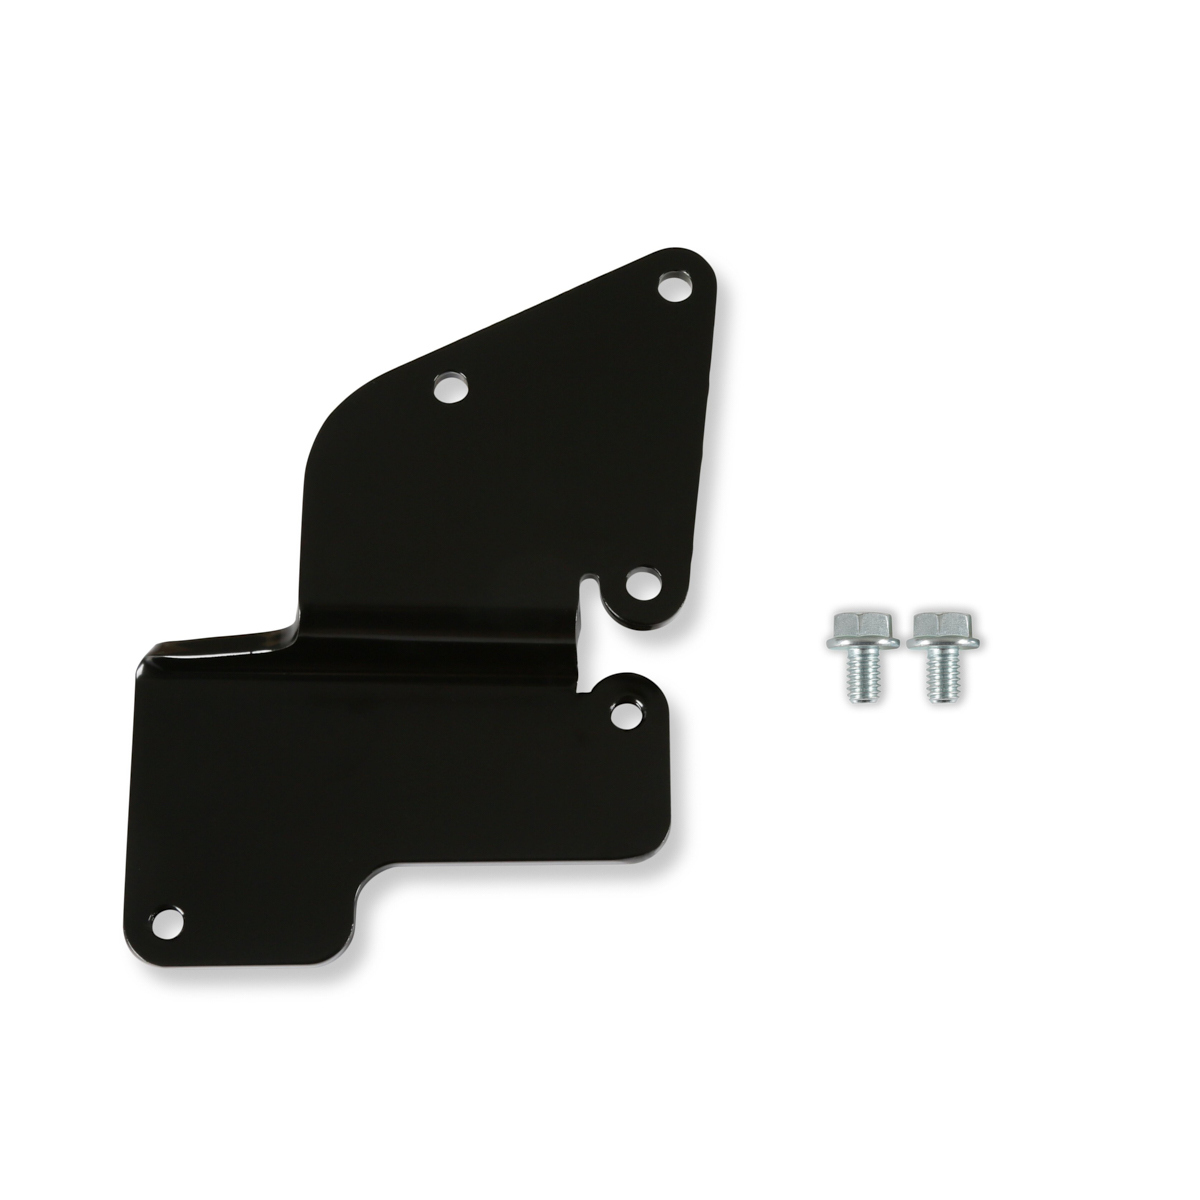 Holley 145-121 Floor Pedal Bracket, Drive-By-Wire, Steel, Black Powder Coat, GM Compact Truck 1994-2004, Each